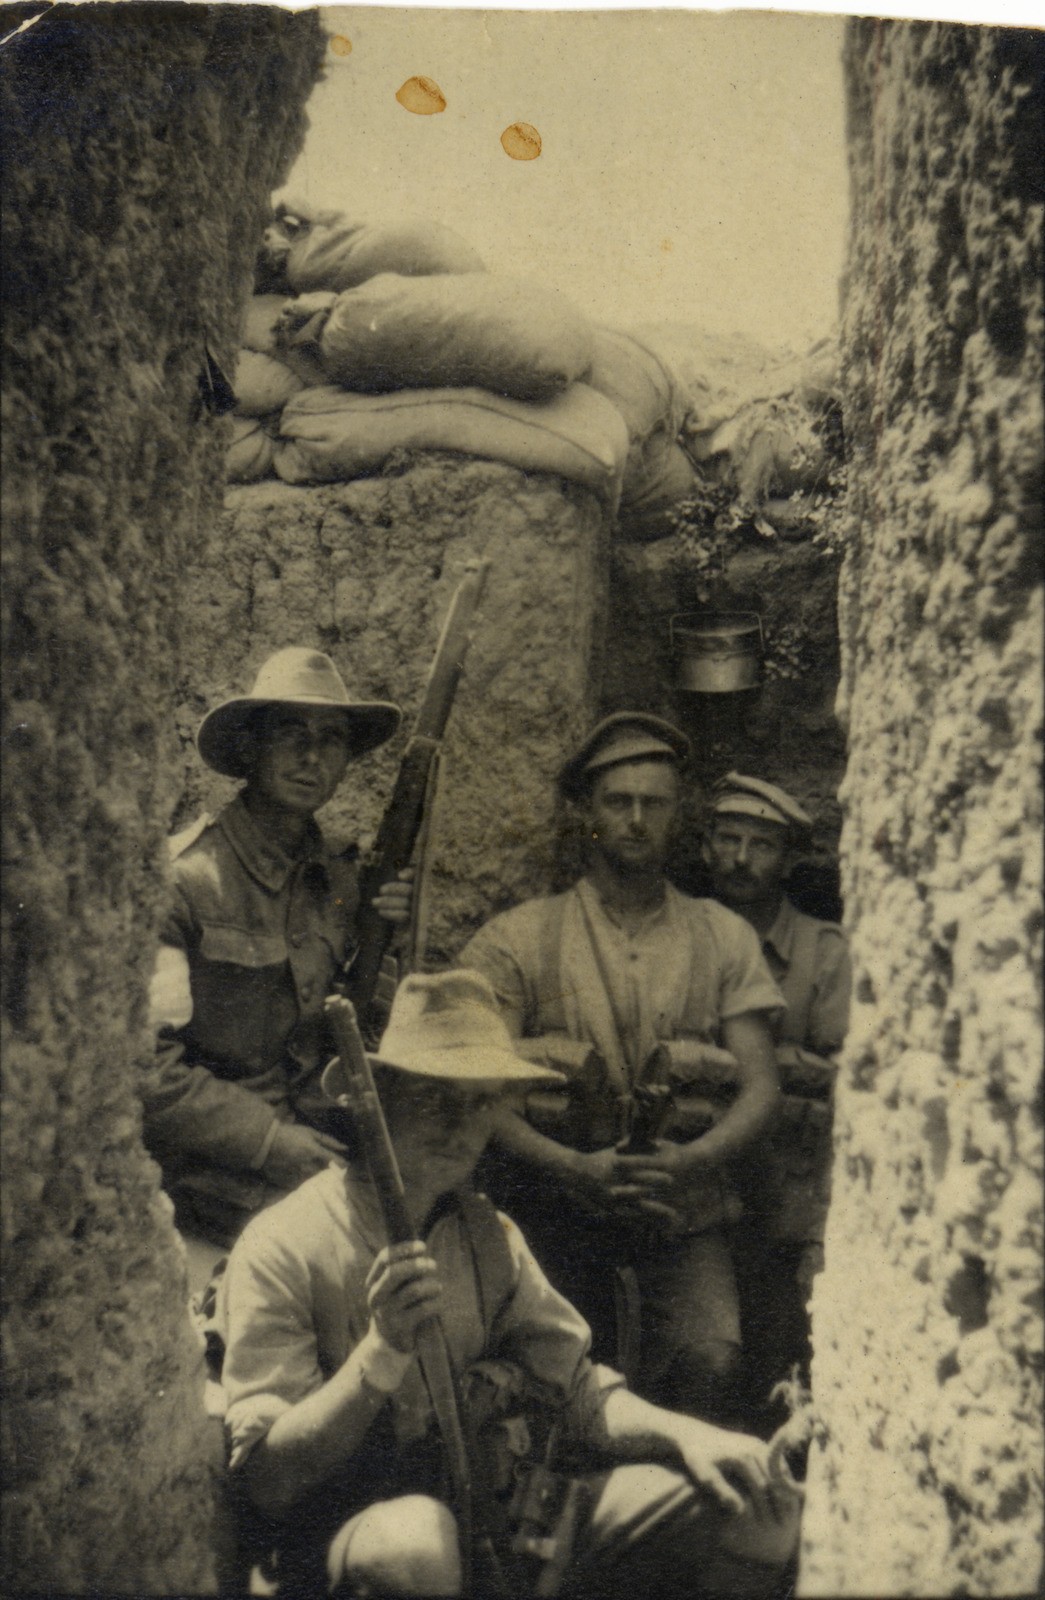  Four Australian soldiers in the trenches at Gallipoli, 1915